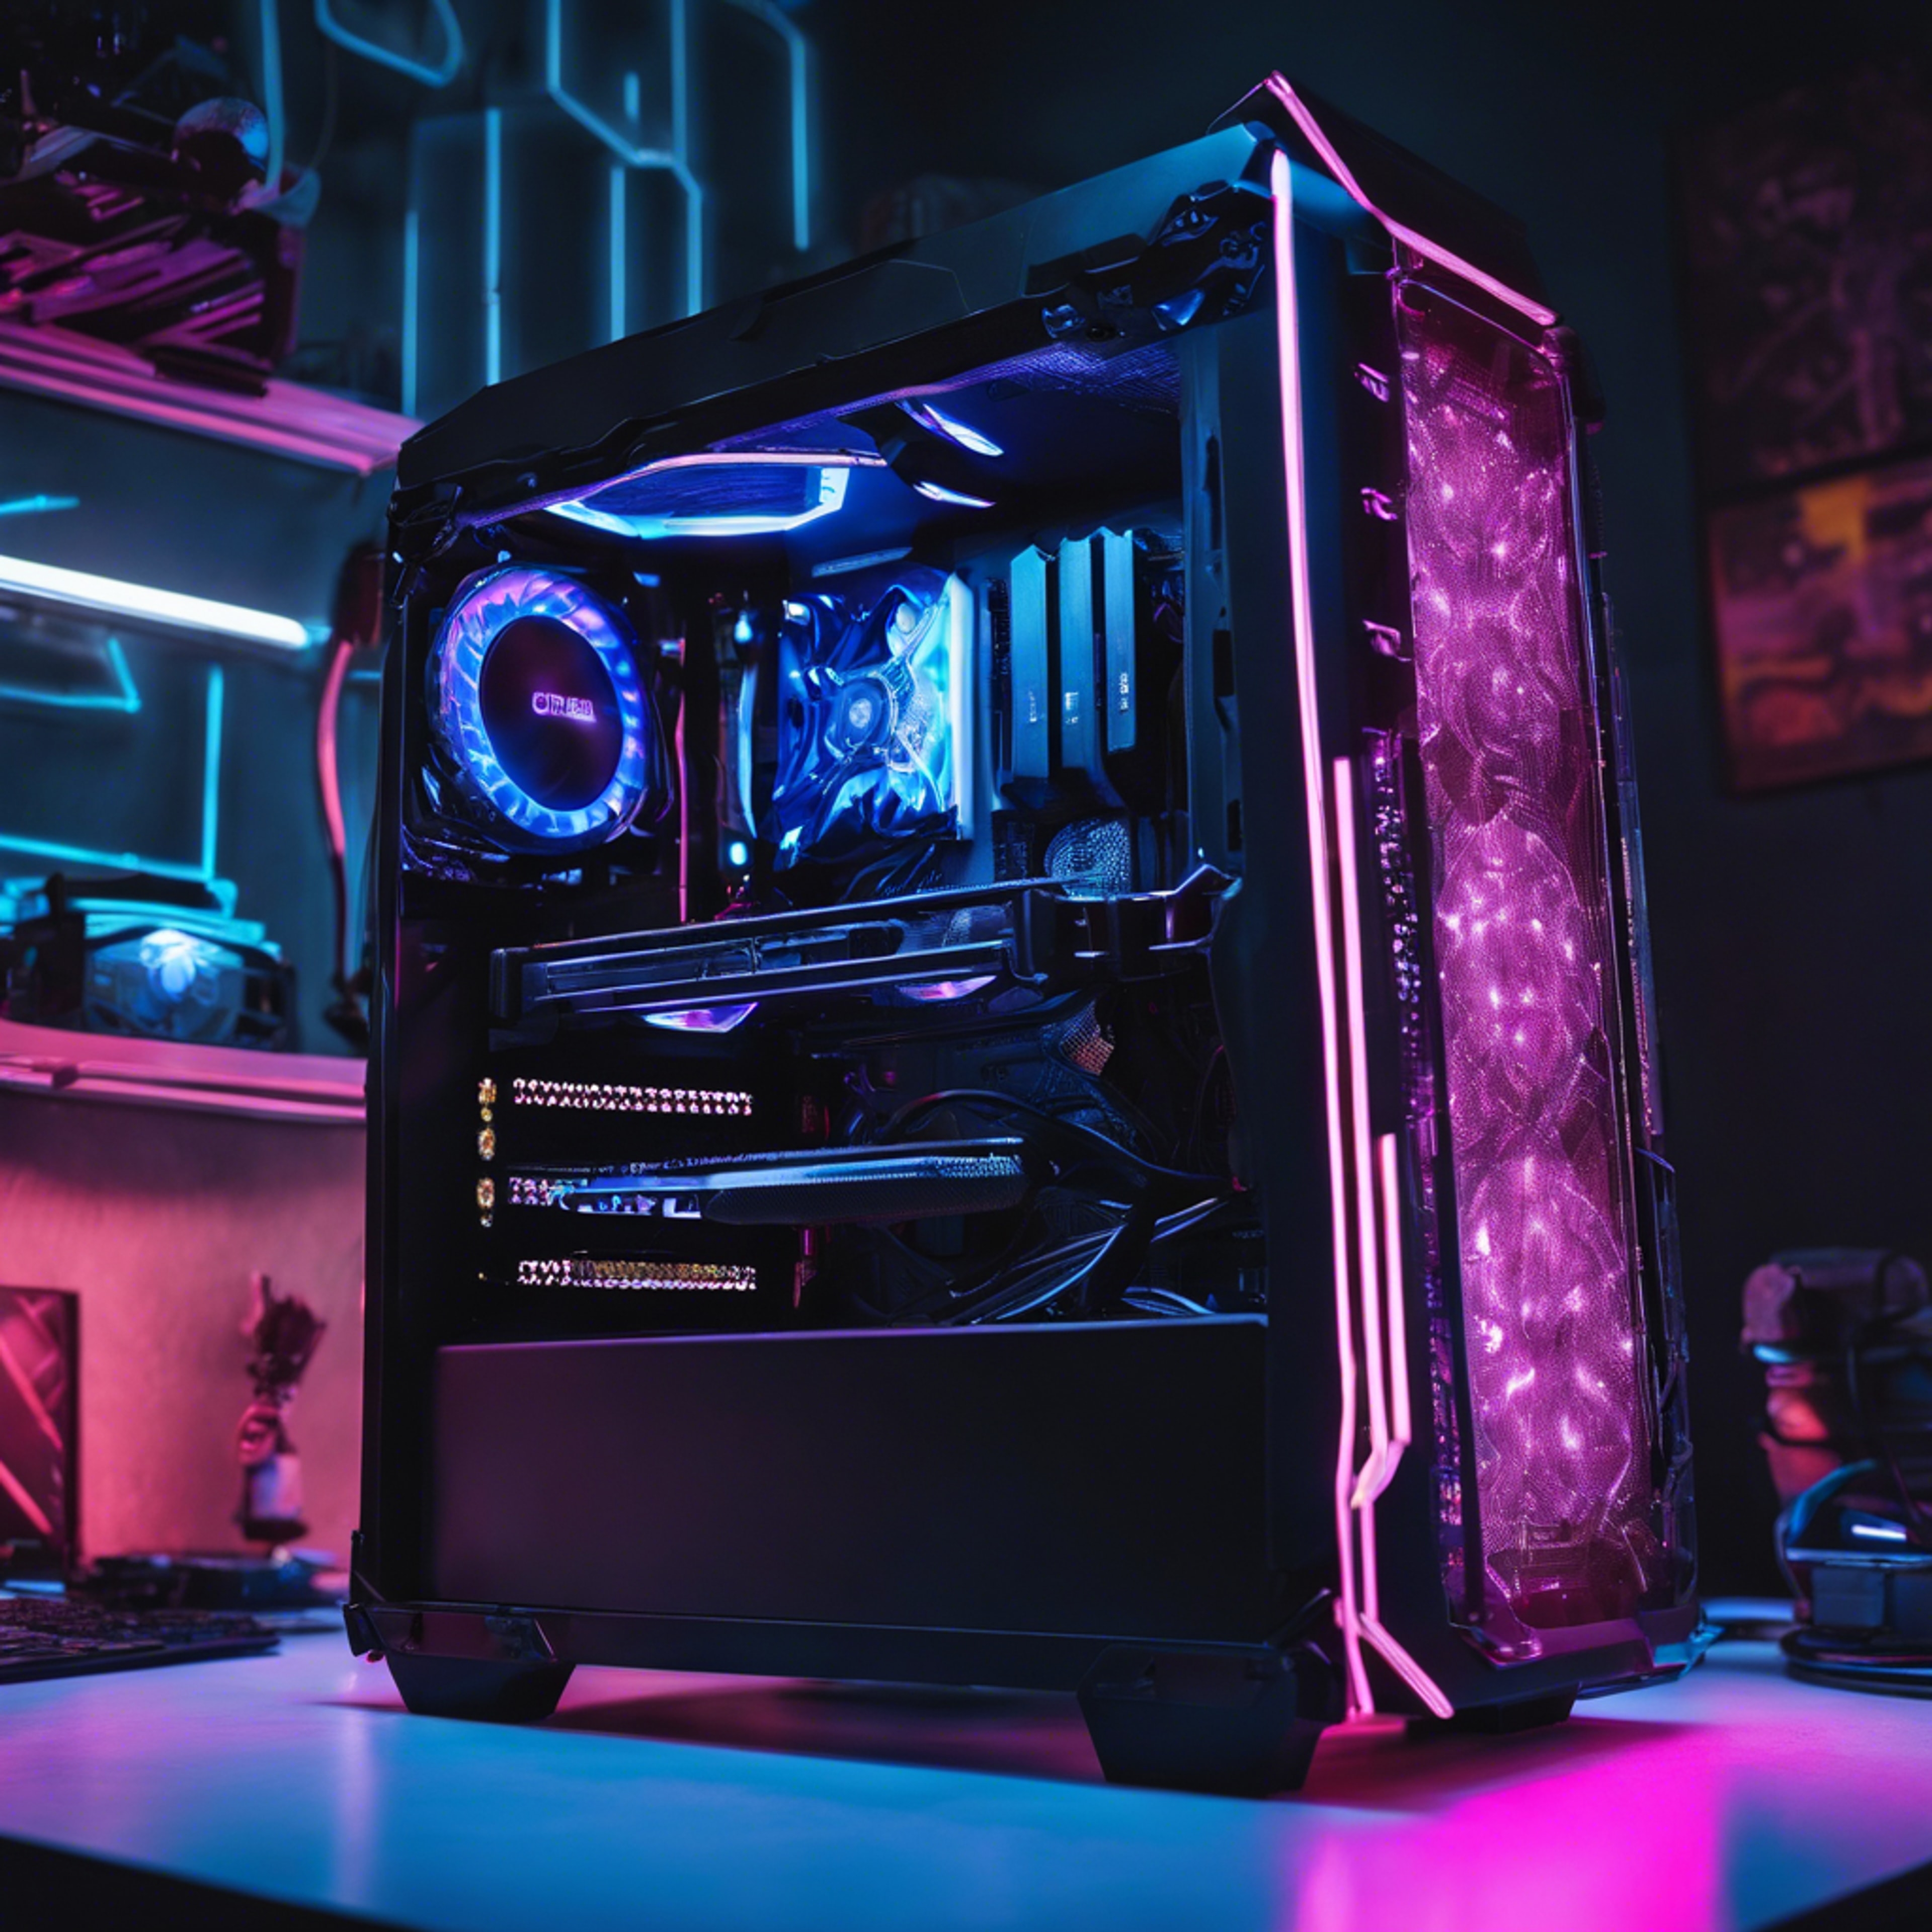 A cyberpunk-style black gaming PC with neon blue LED lights. Taustakuva[4f1d7ee7161d4e2894f4]